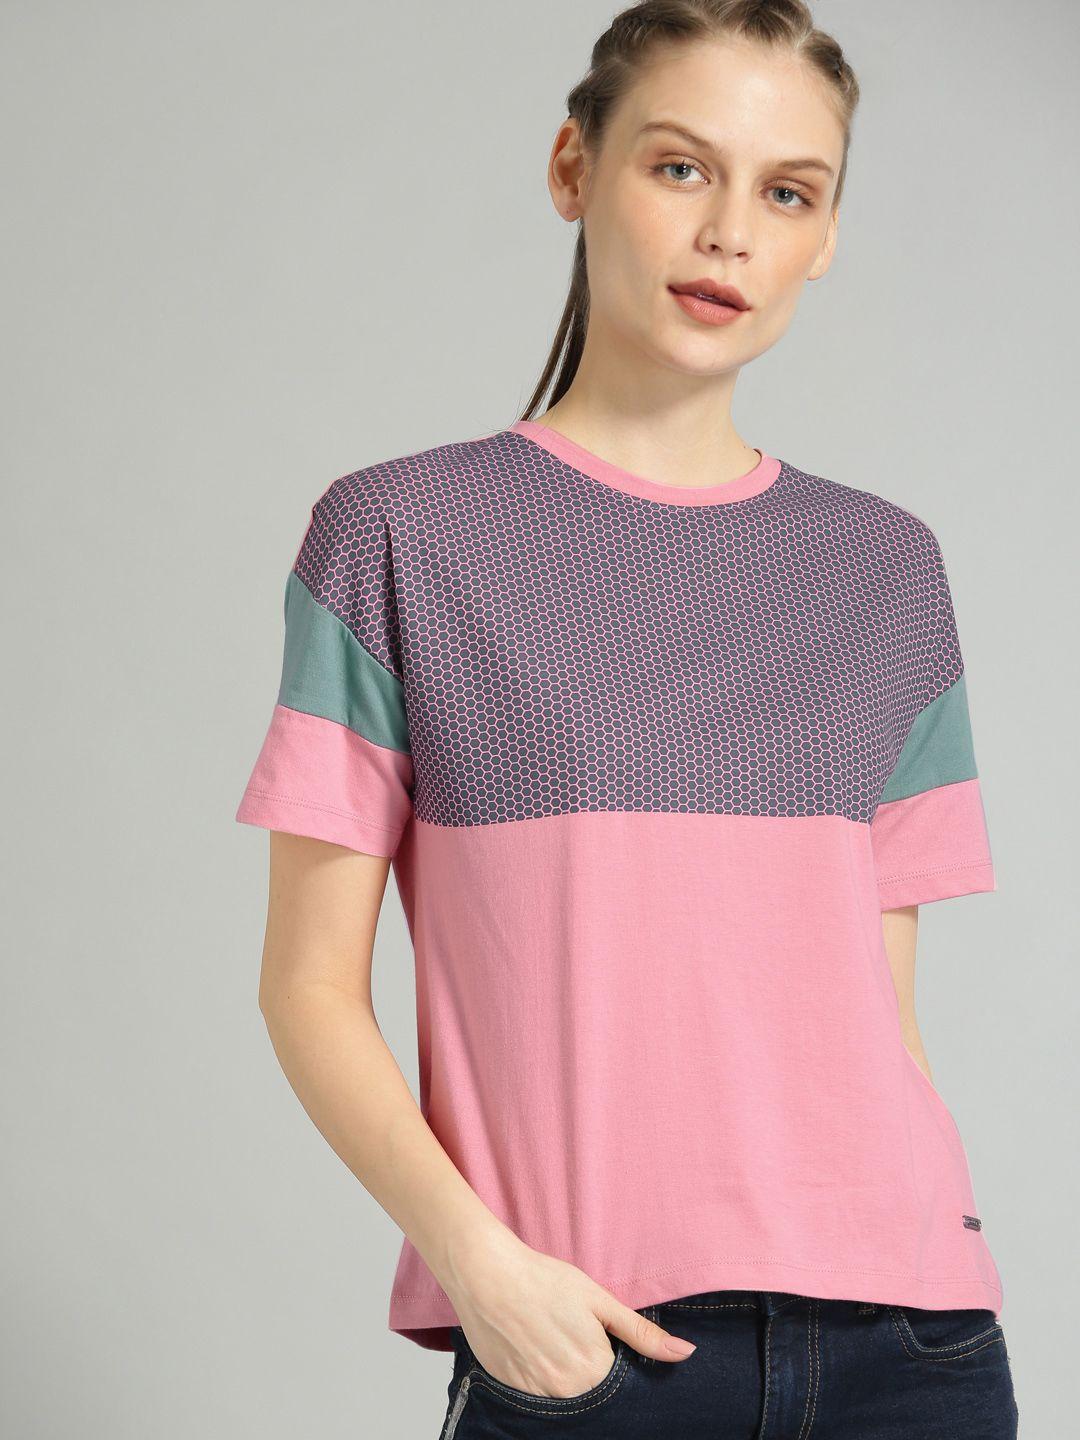 roadster-women-pink--blue-printed-round-neck-pure-cotton-t-shirt